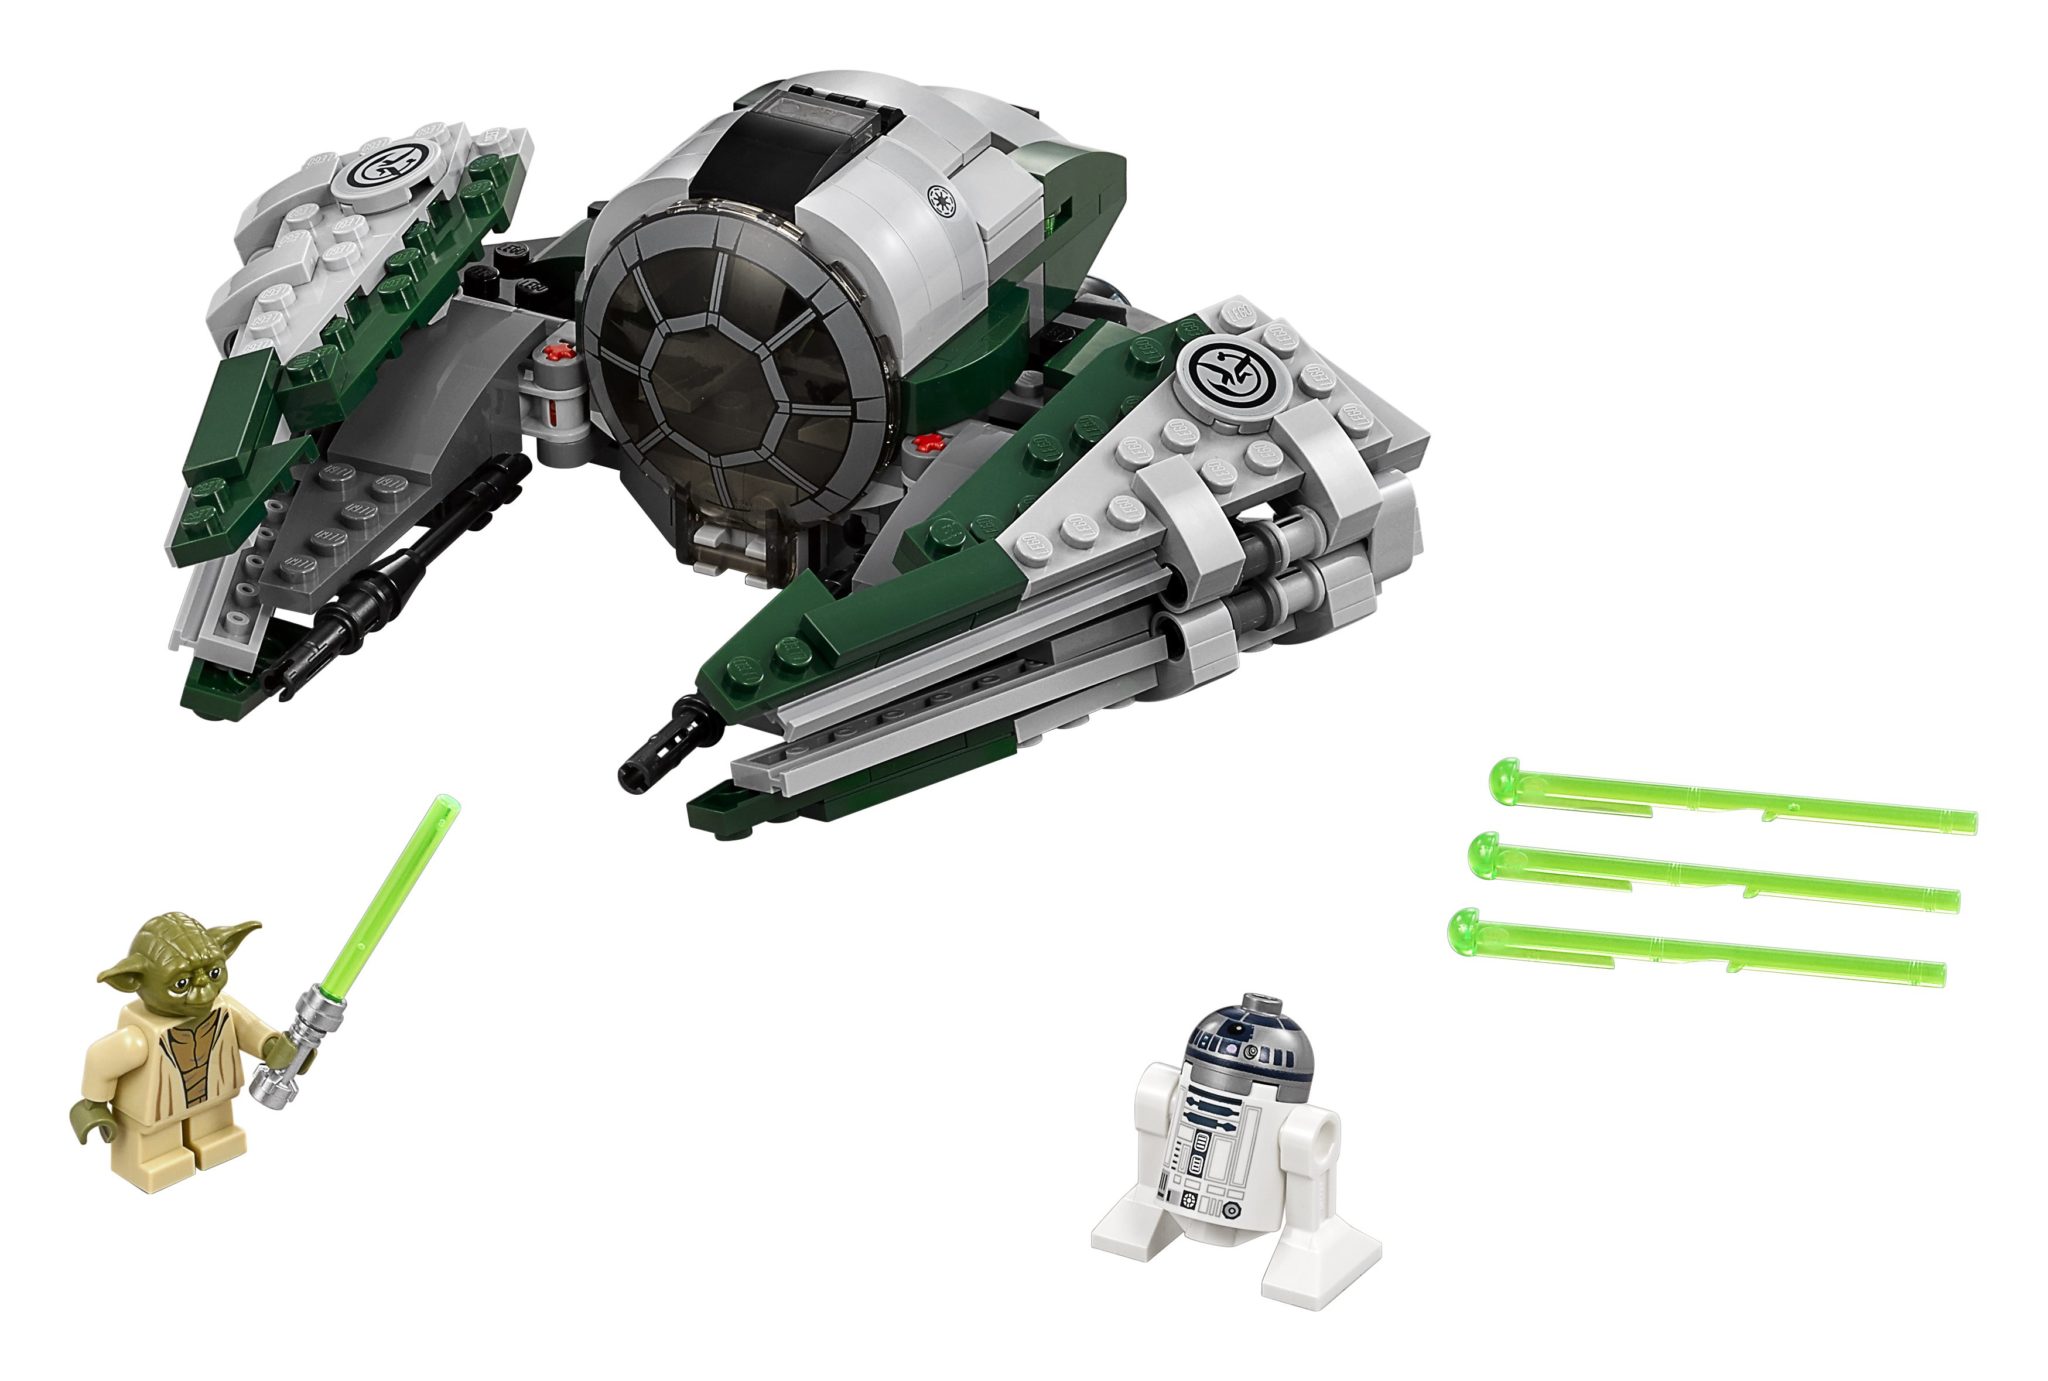 Cool New Toys Unveiled at Toy Fair 2017 - LEGO Star Wars 75168_ Yoda's Jedi Starfighter